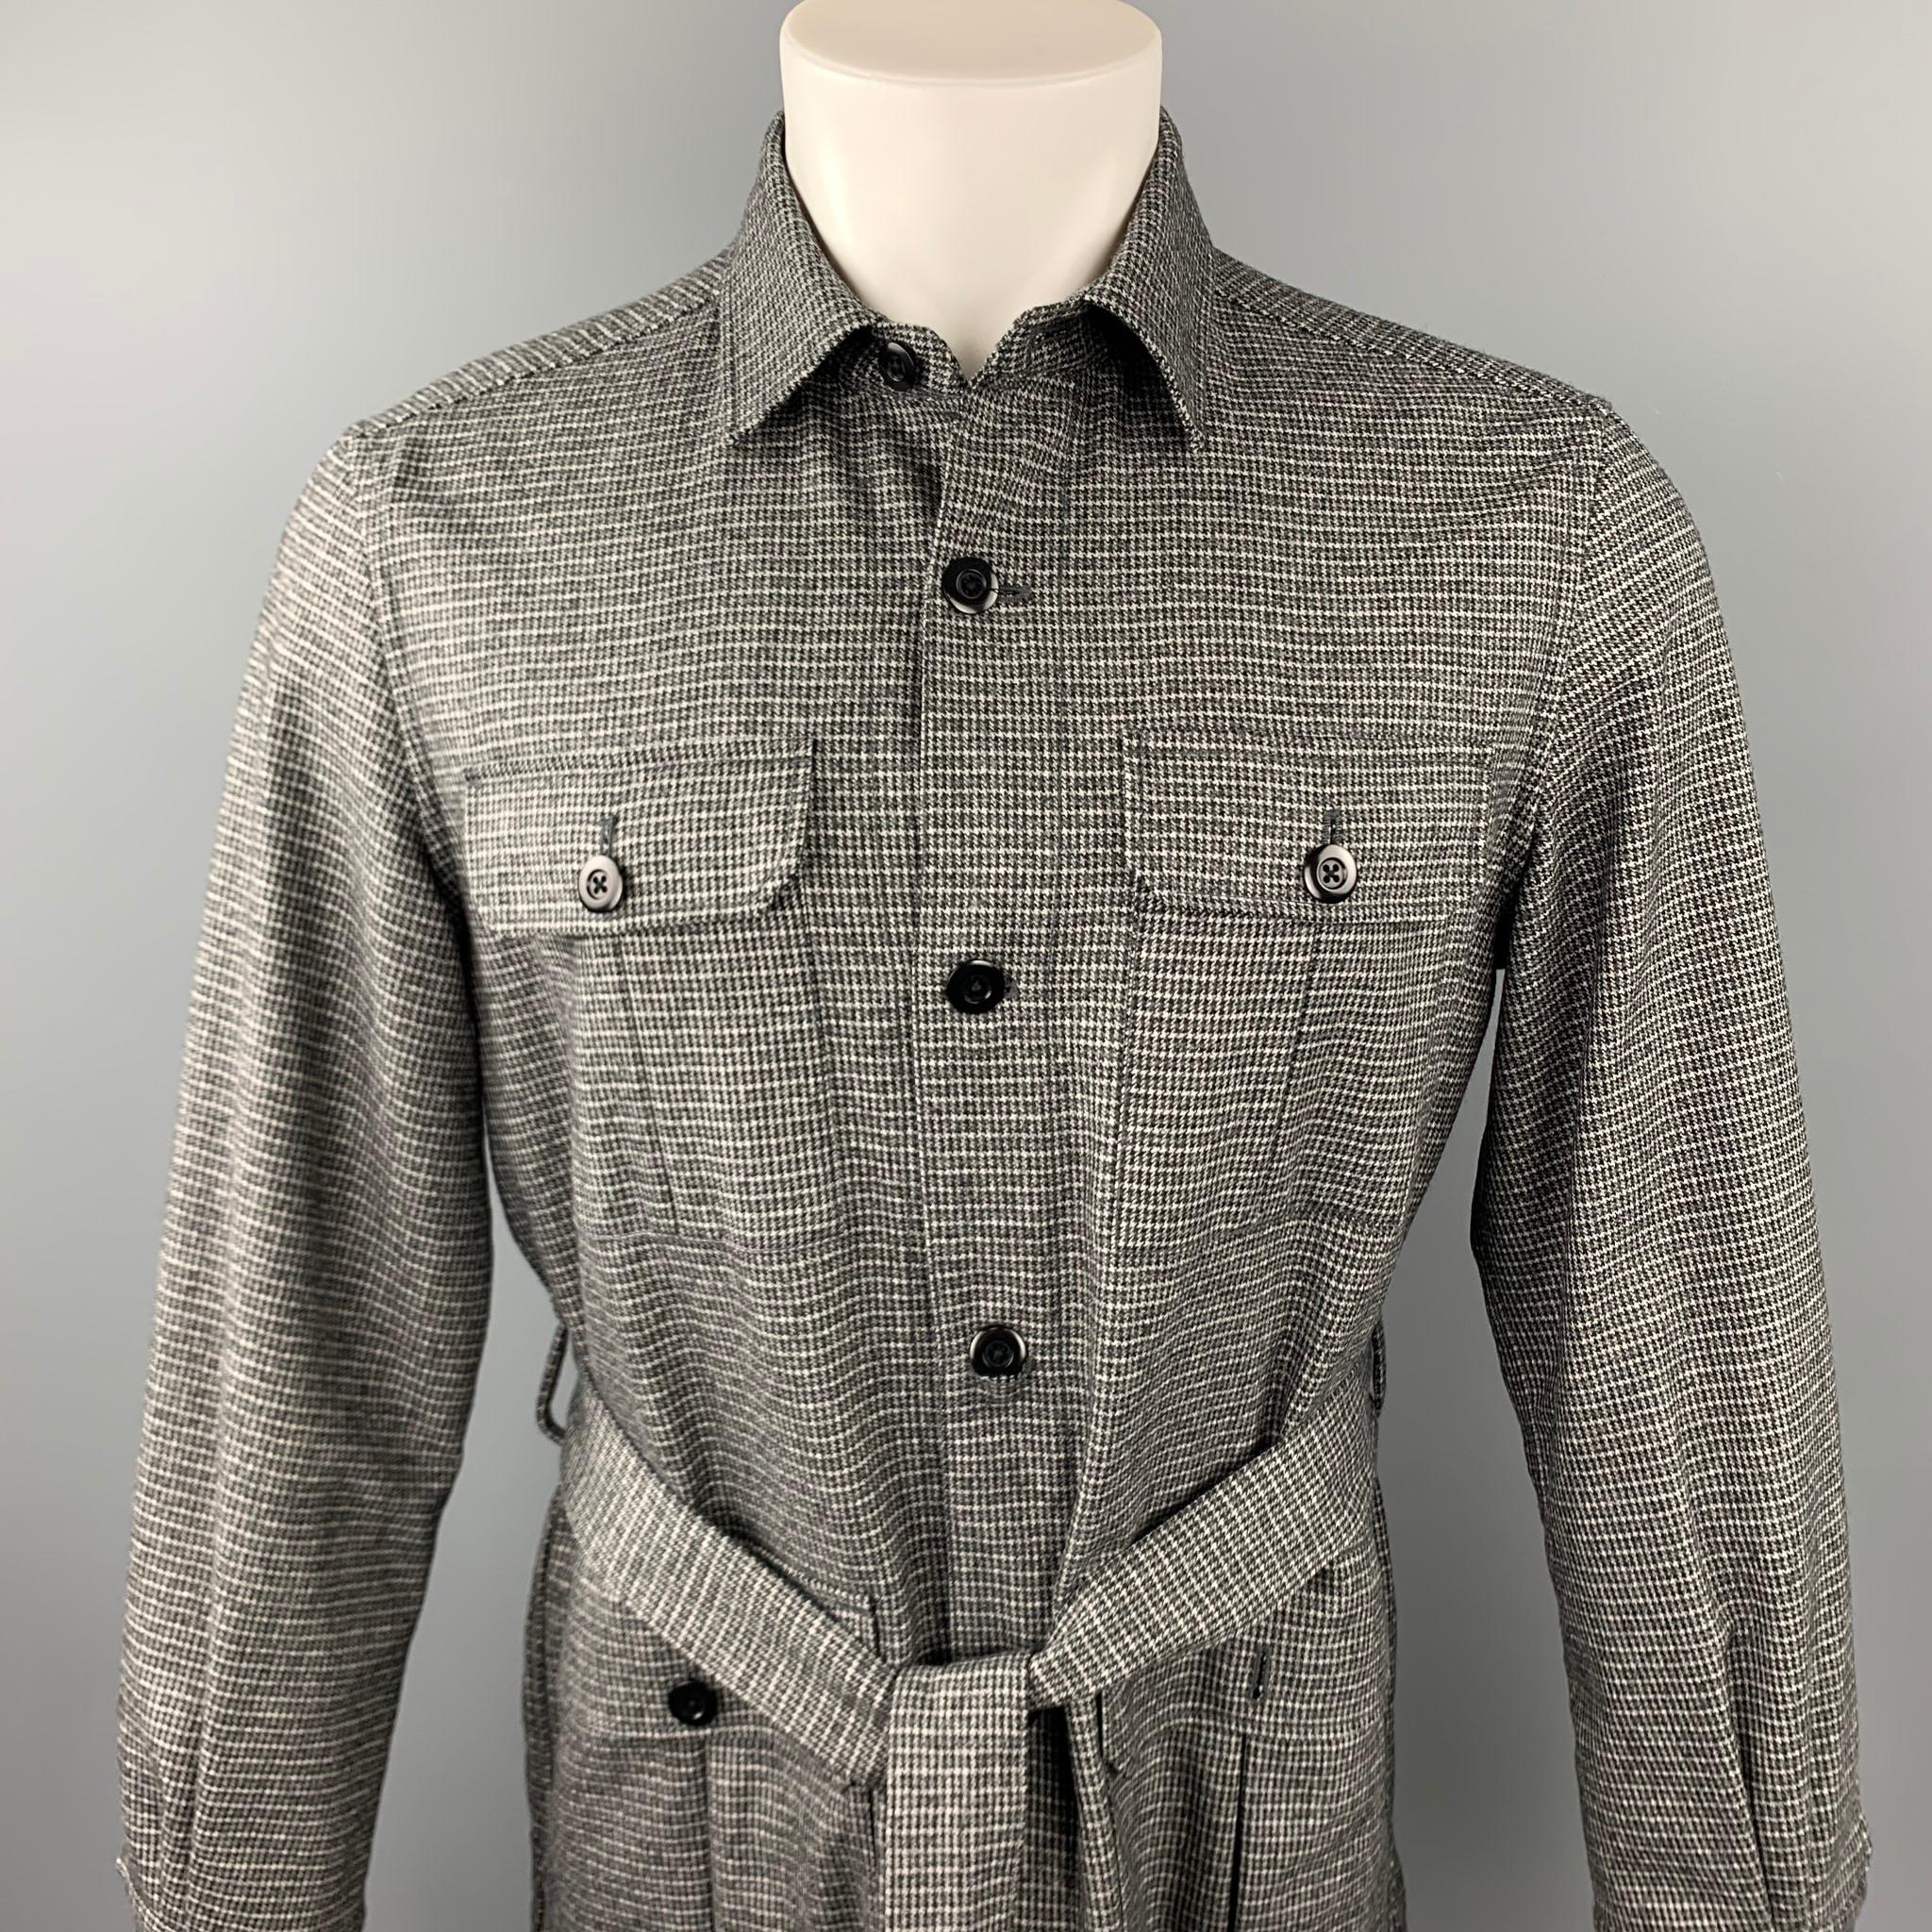 ESTNATION jacket comes in a grey houndstooth wool blend featuring a belted style, front patch pockets, spread collar, and a buttoned closure. 

Excellent Pre-Owned Condition.
Marked: M

Measurements:

Shoulder: 18 in. 
Chest: 40 in. 
Sleeve: 24.5